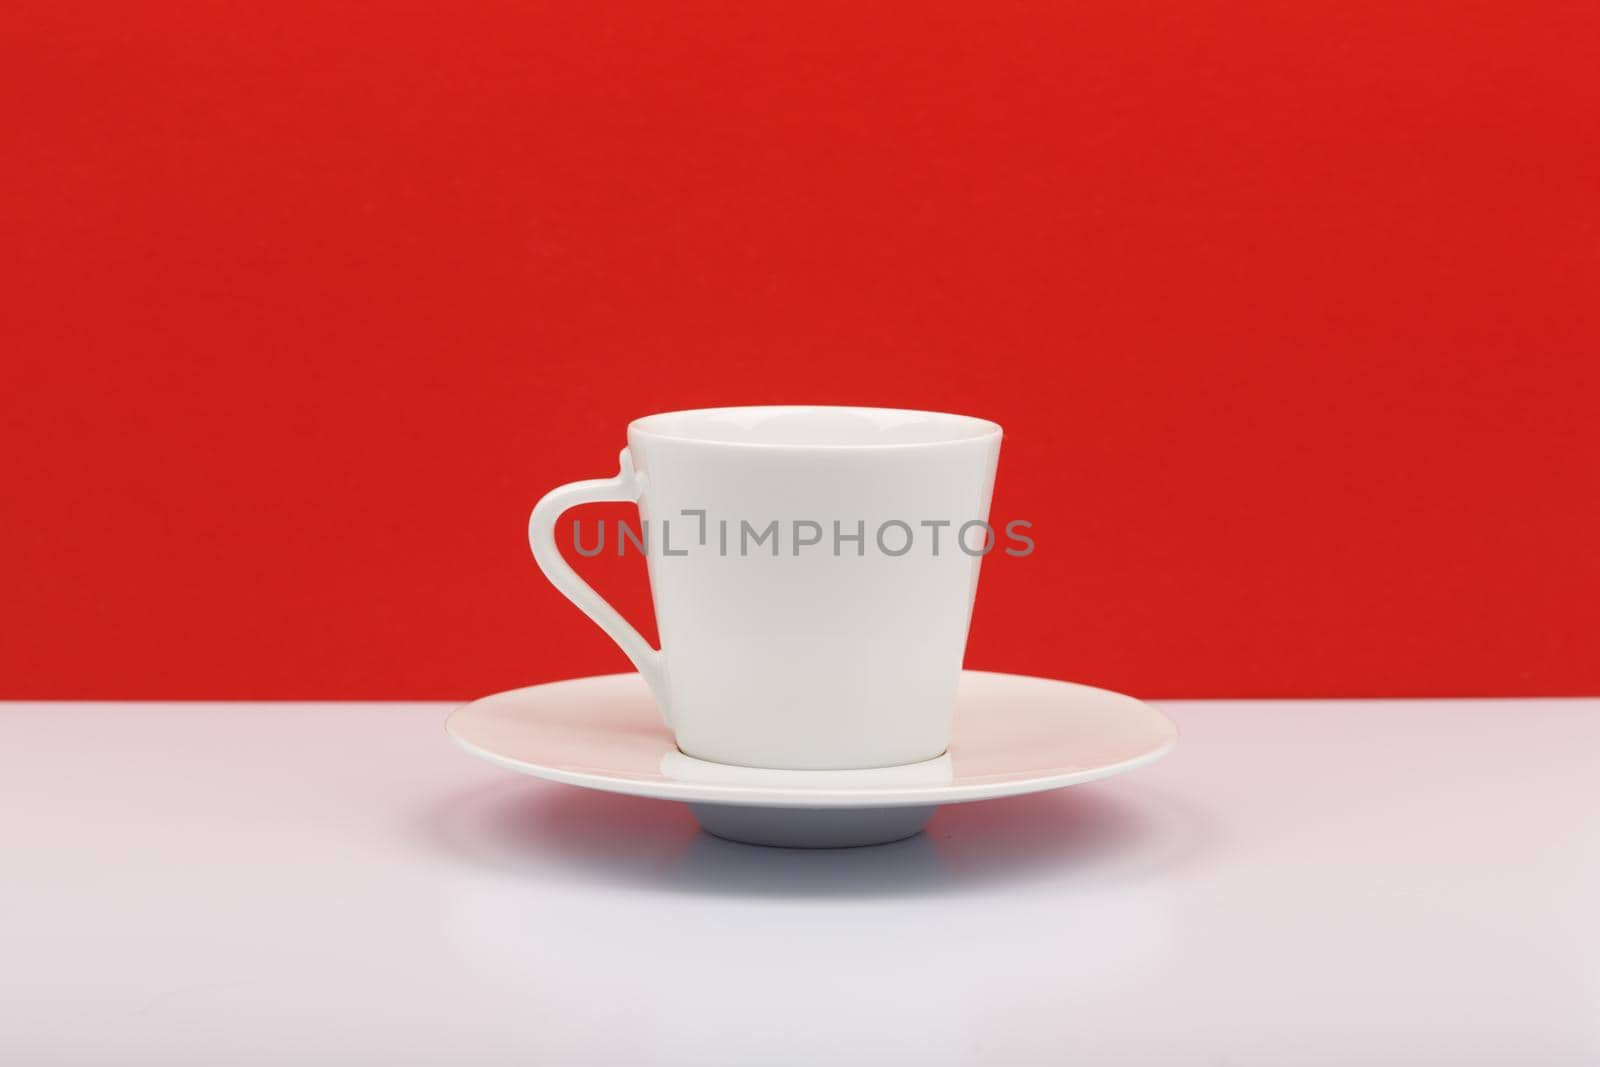 White coffee or tea cup on white table against red background by Senorina_Irina